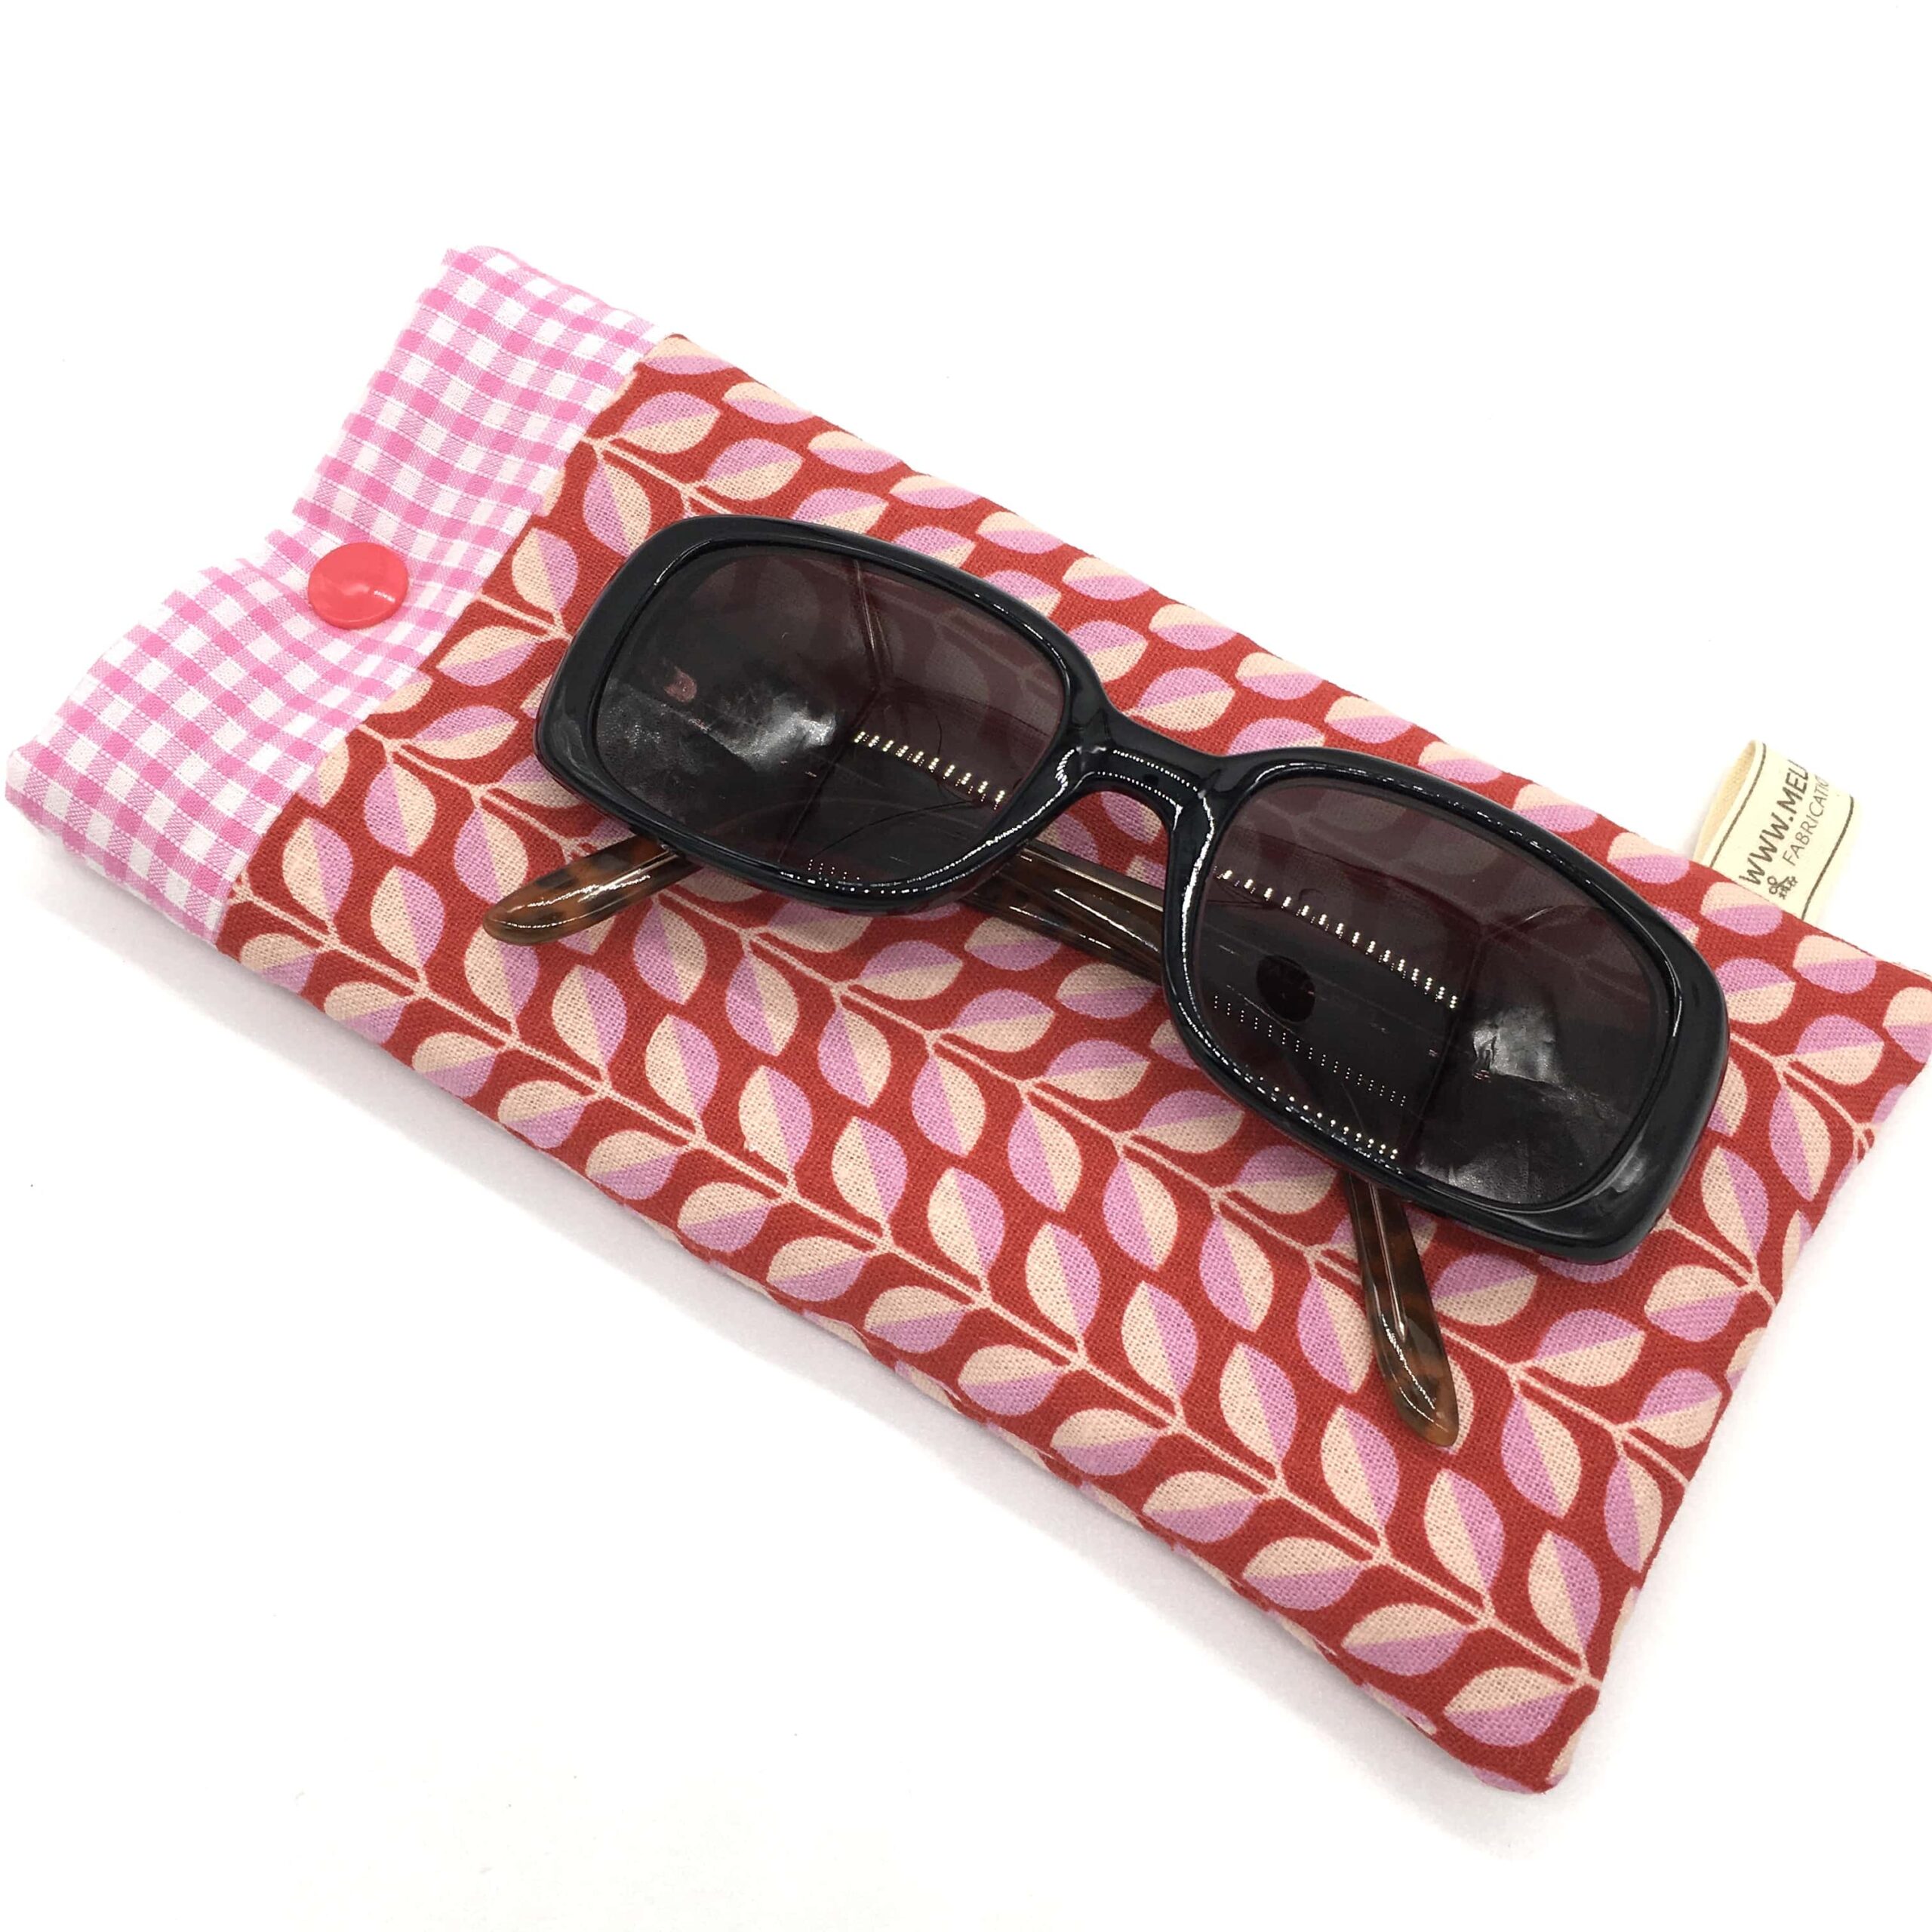 Etui lunettes lin rose 2 MELIFACTORY